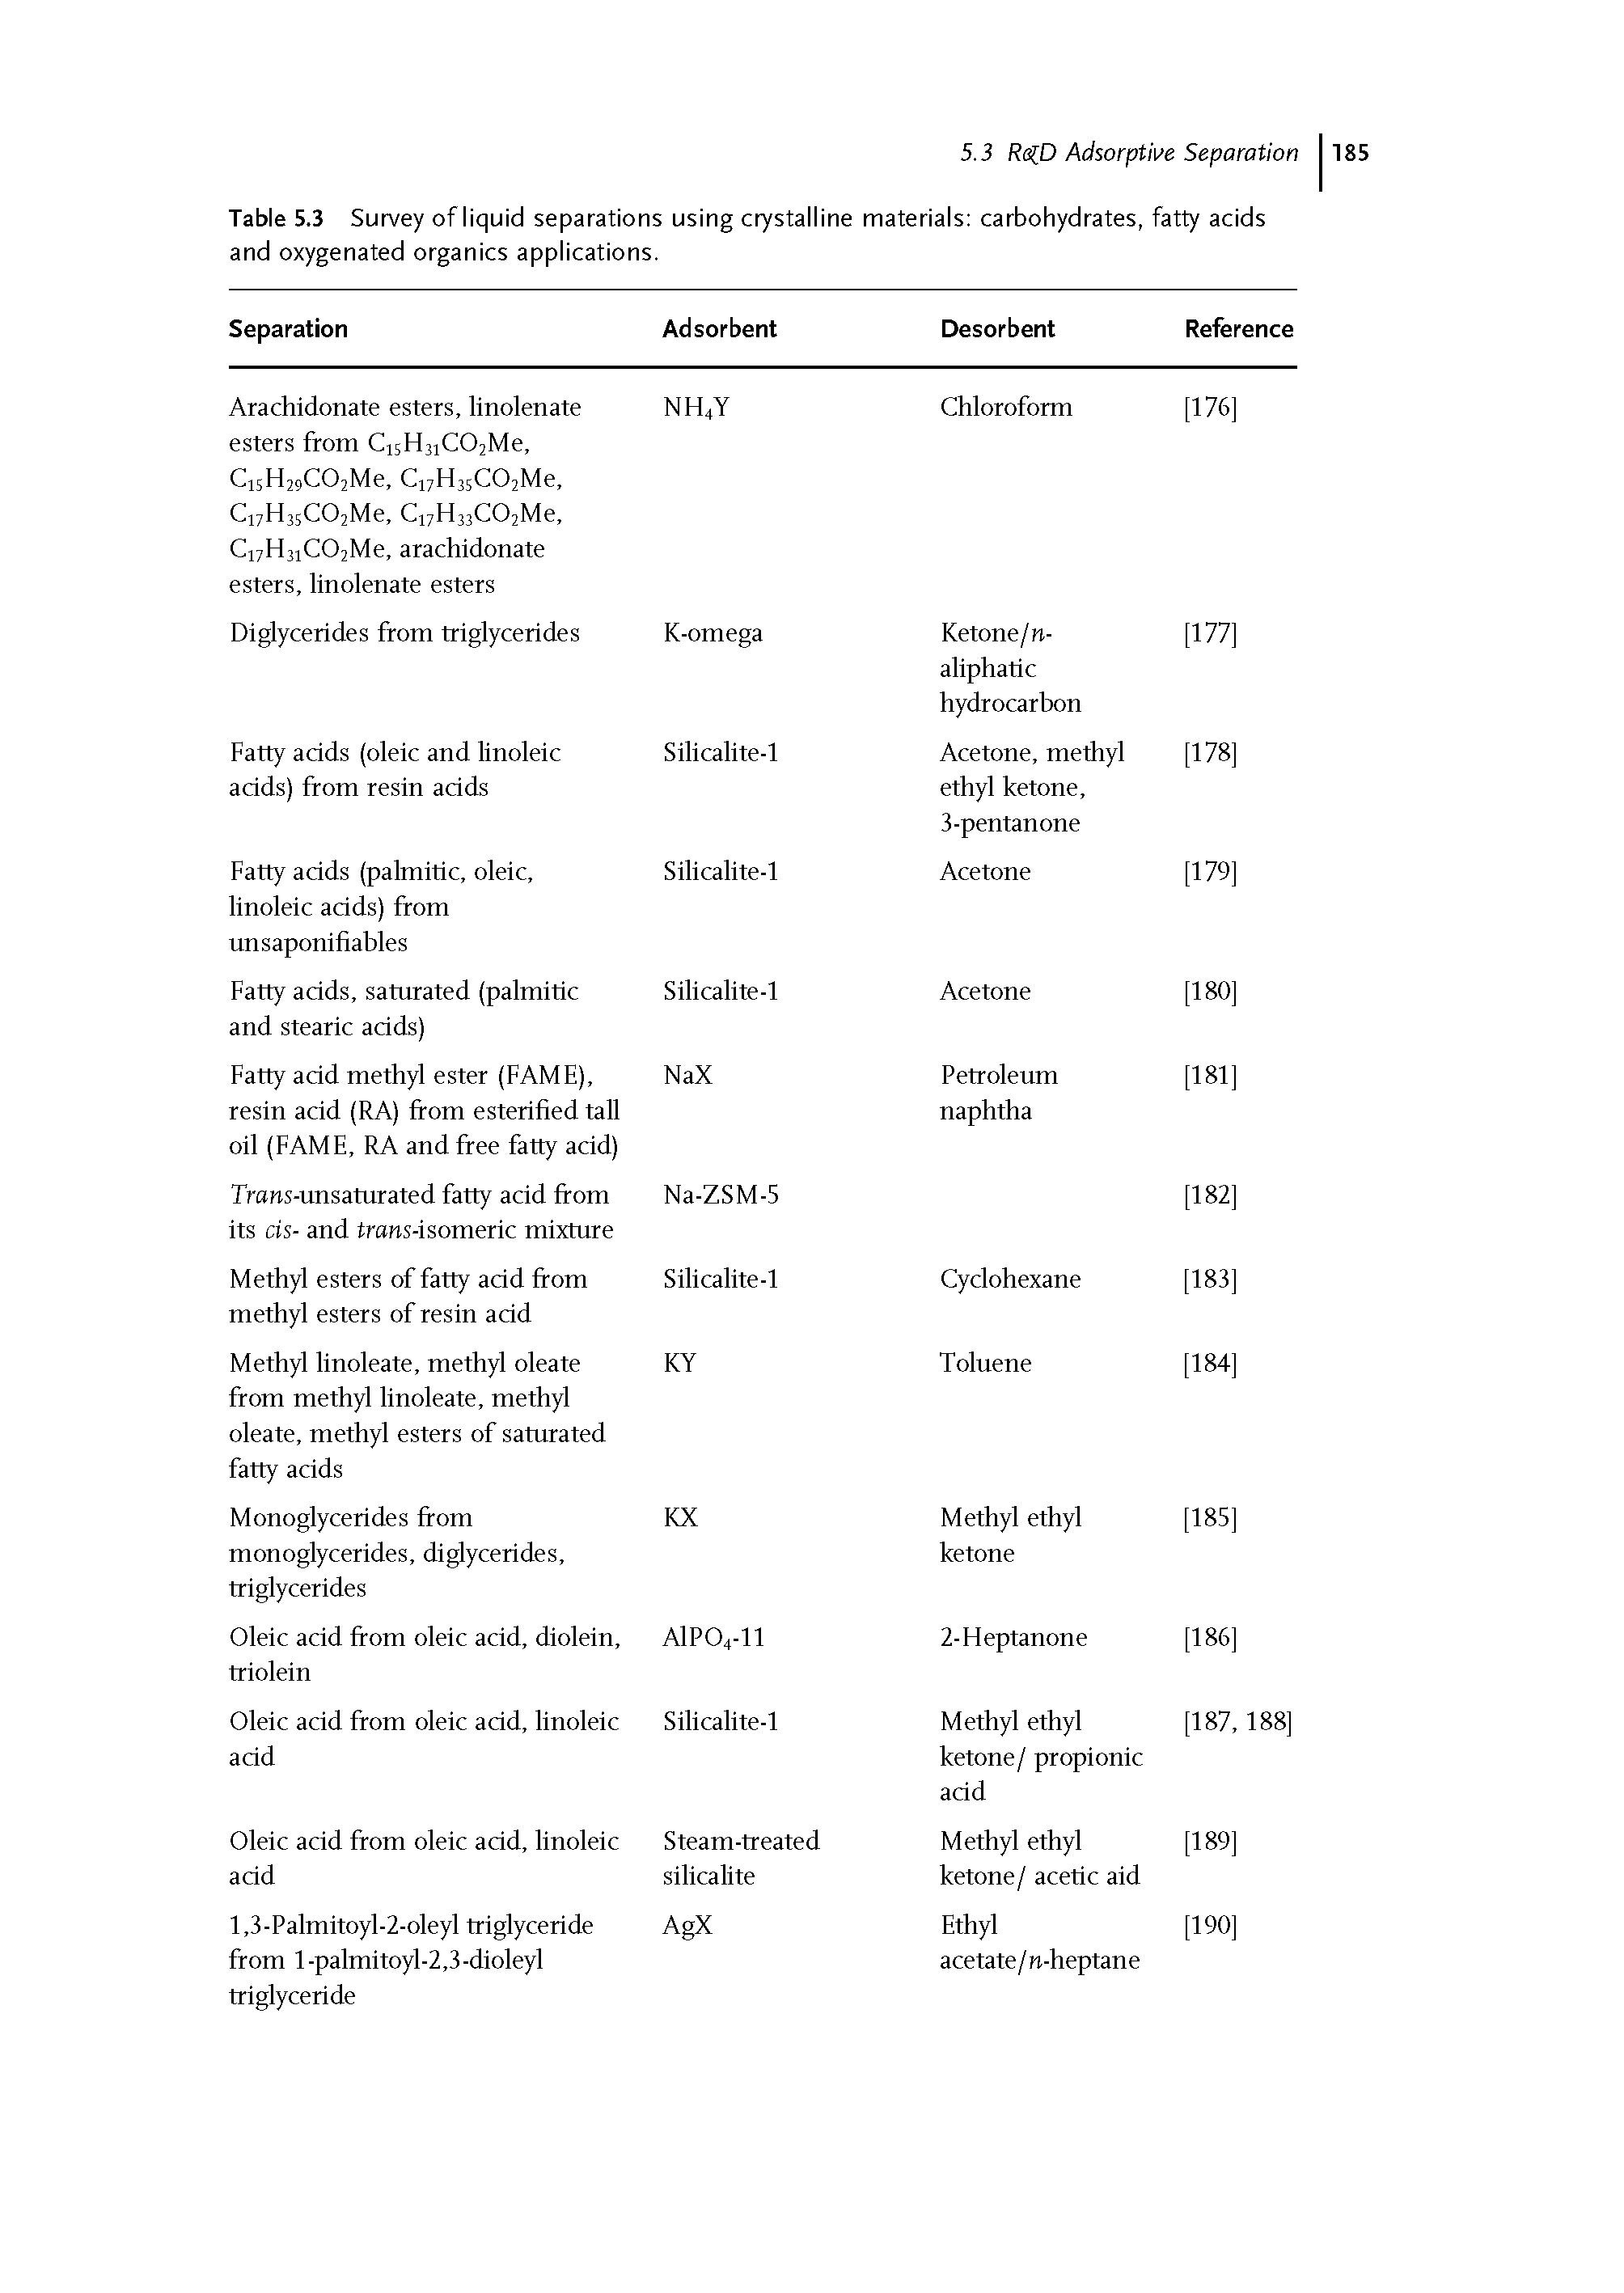 Table 5.3 Survey of liquid separations using crystalline materials carbohydrates, fatty acids and oxygenated organics applications.